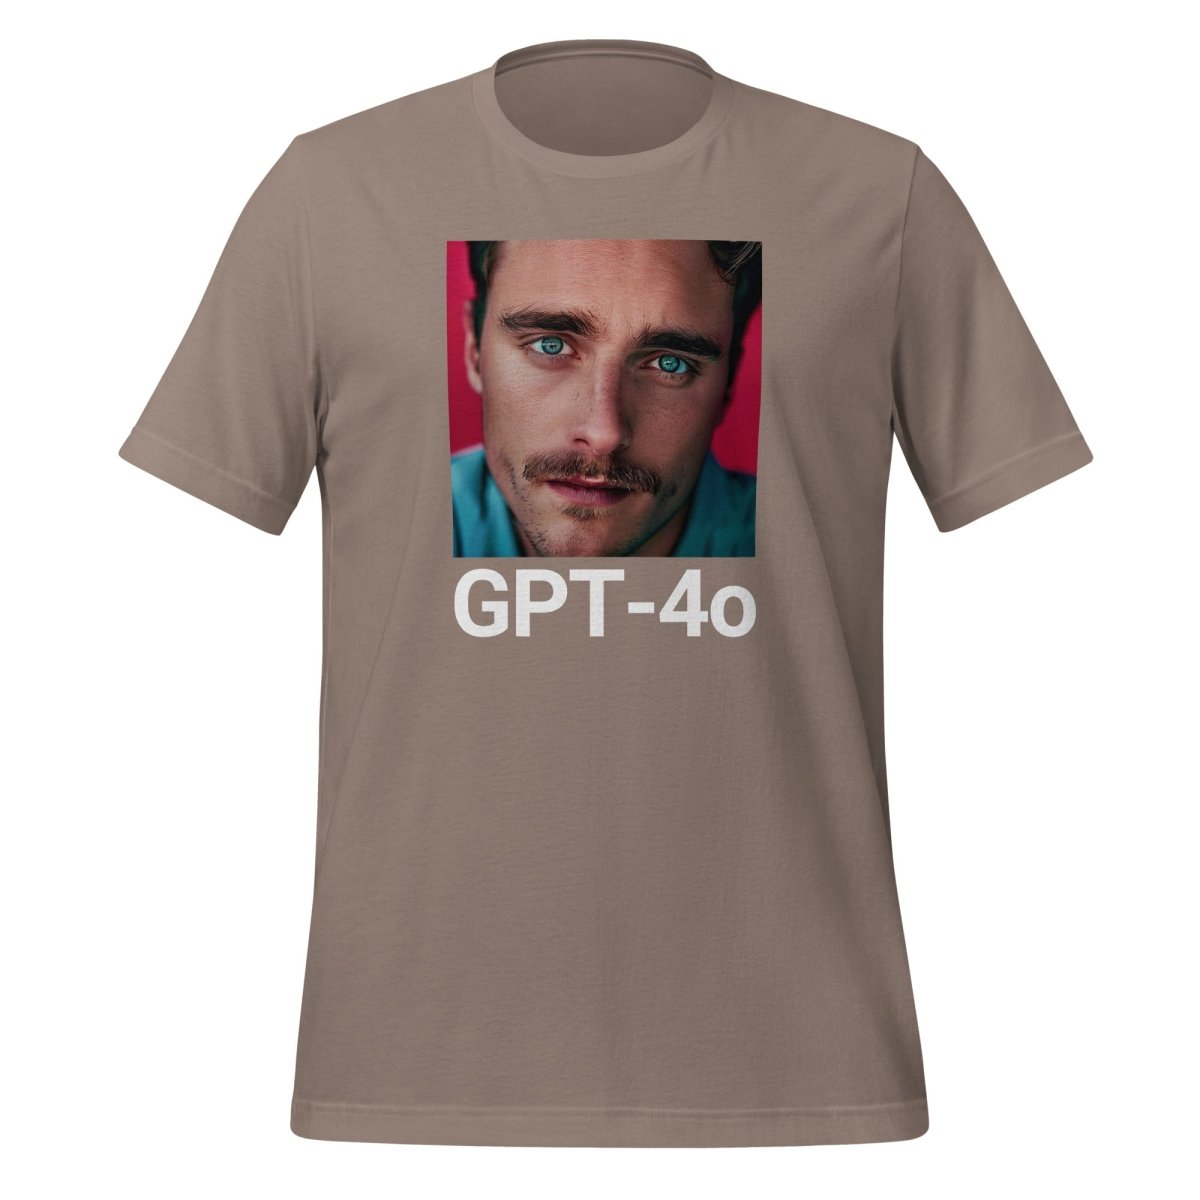 GPT - 4o is Her T - Shirt (unisex) - Pebble - AI Store